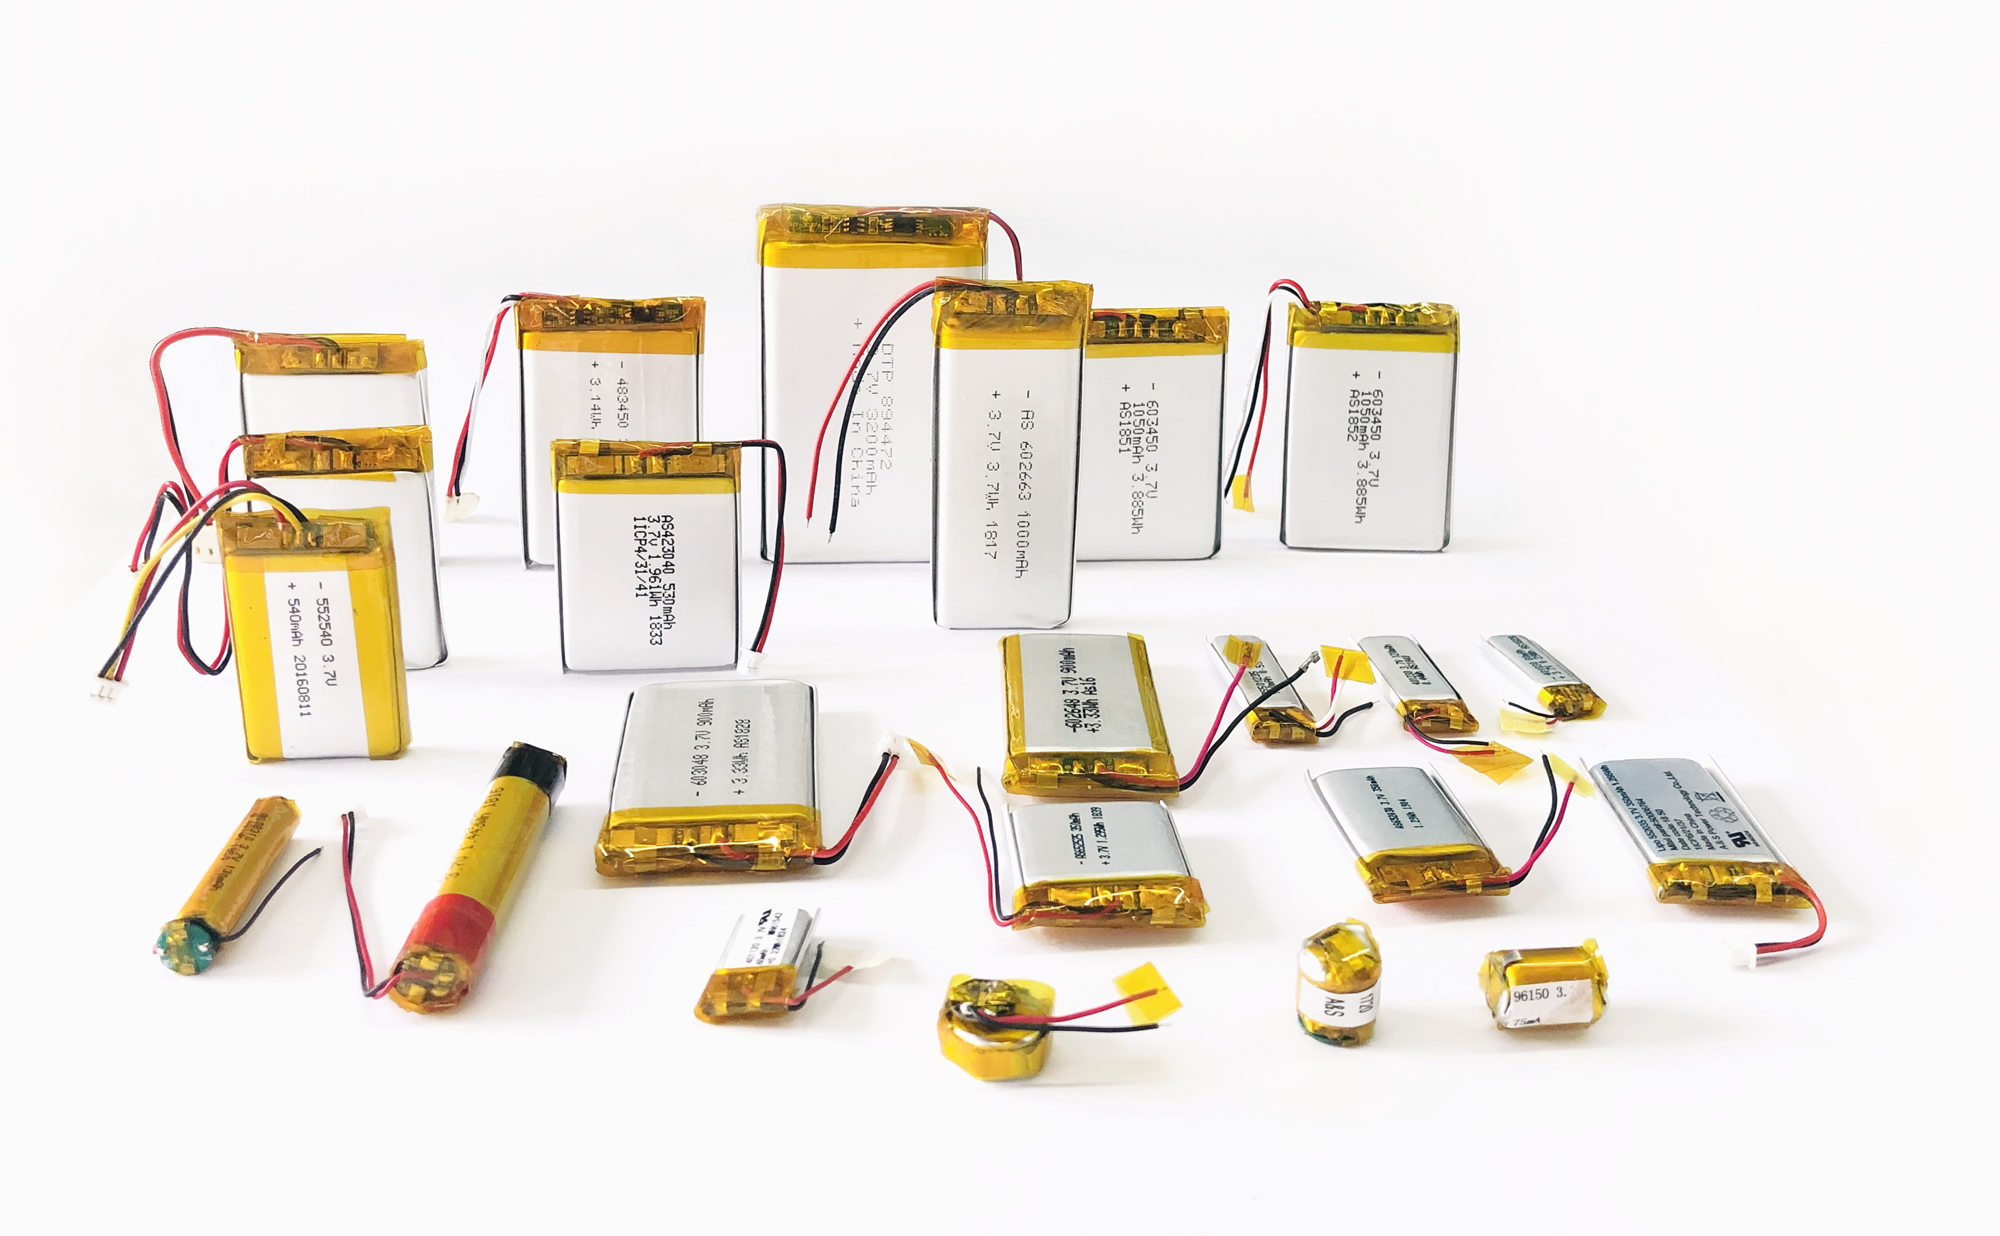 Impact of Discharge Rates in LiPo Batteries for Various Applications